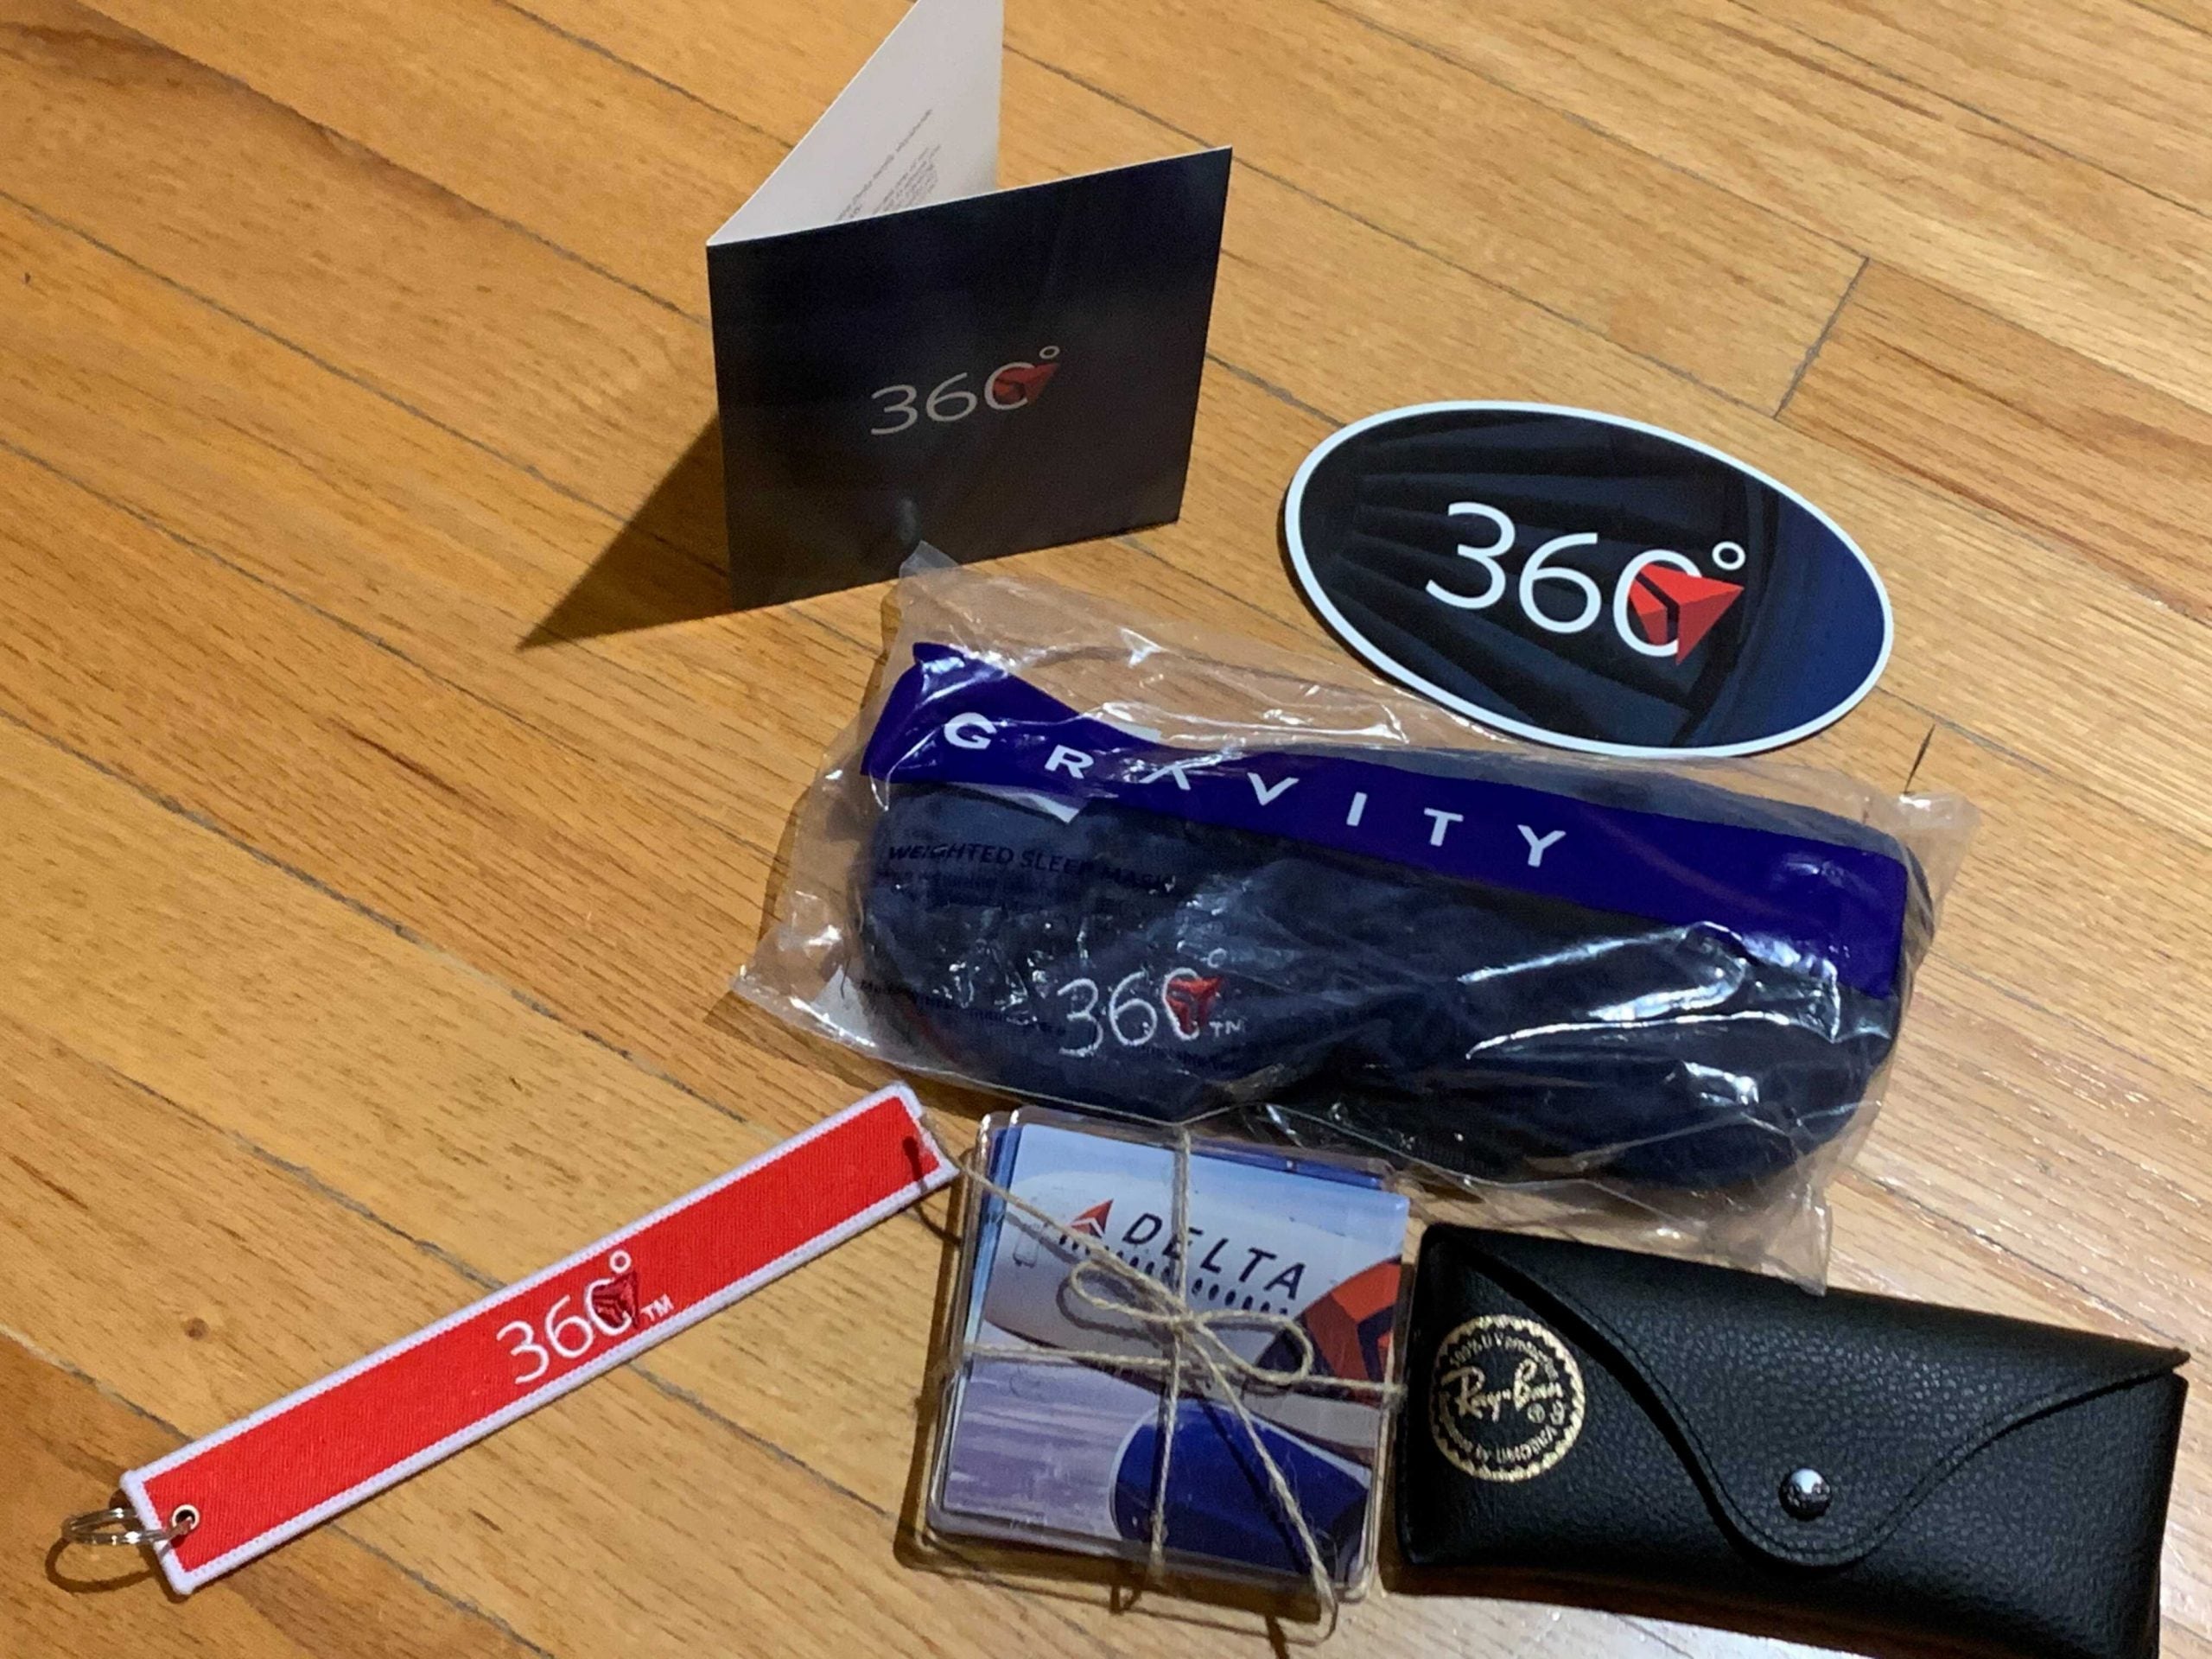 Delta 360 welcome kit